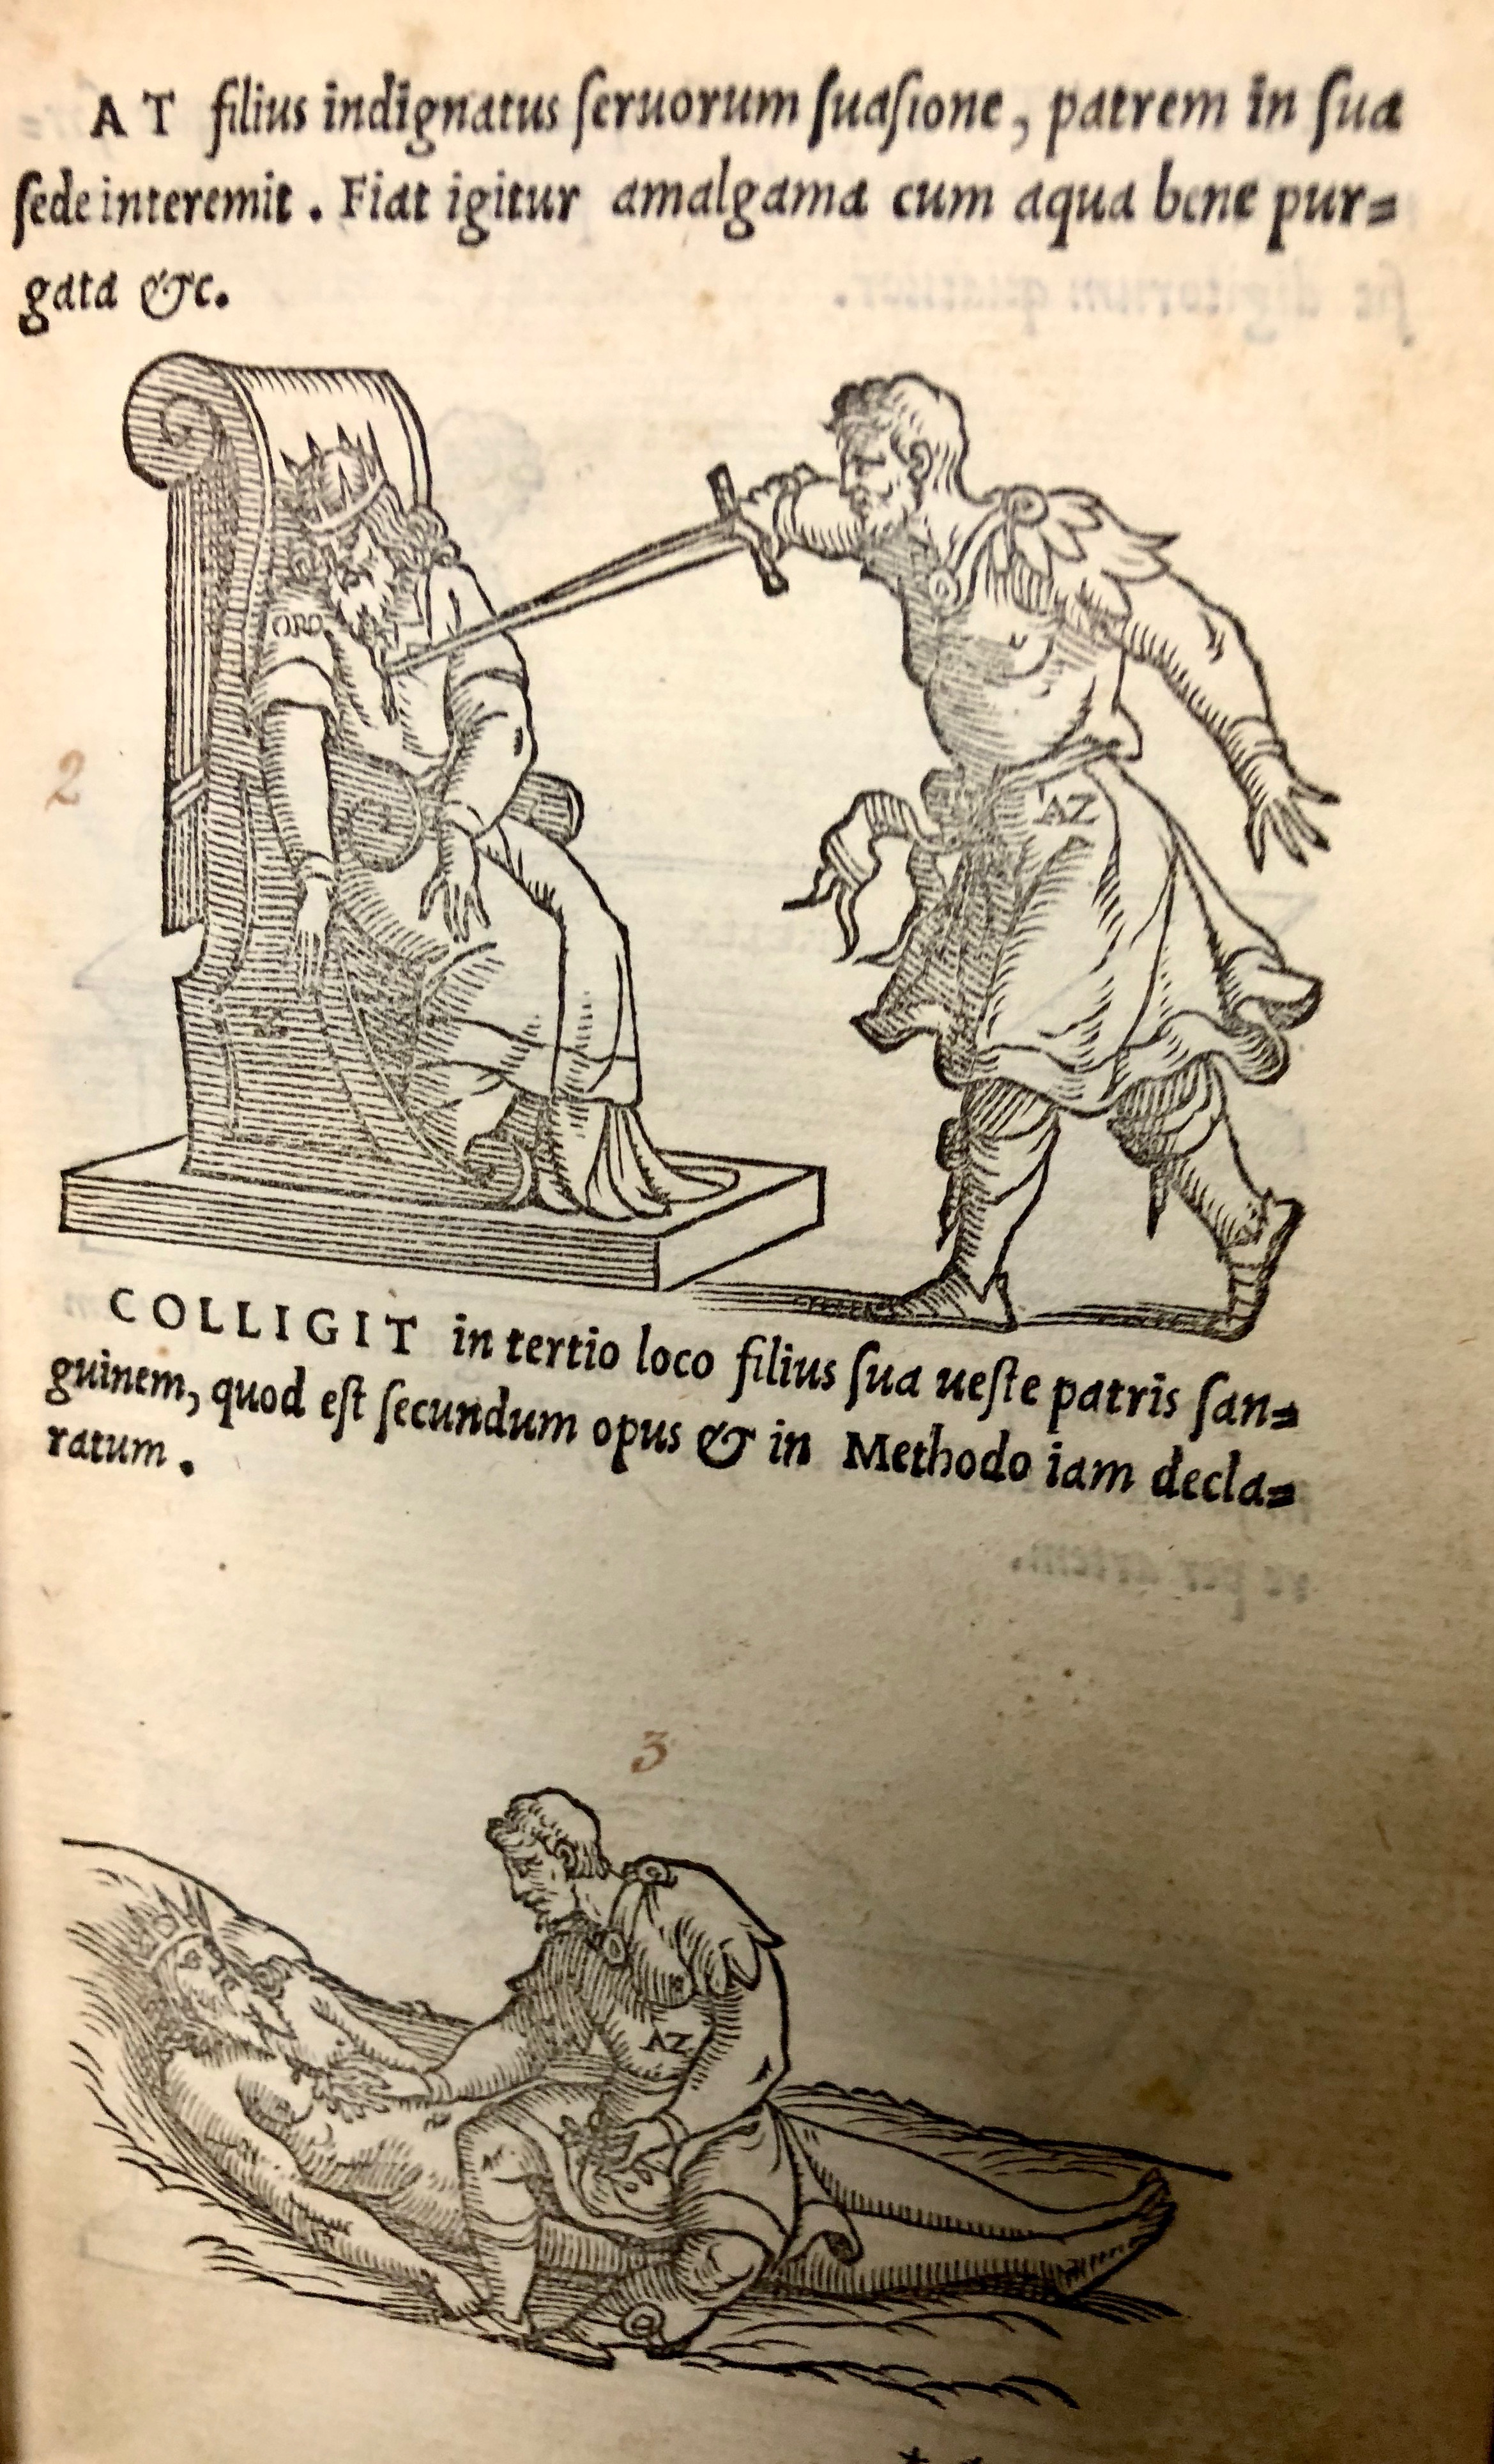 Step two: the son, incited by the servants, kills the King. Step three: the son catches the King's blood on his robes. From ' Pretiosa margarita : novella de thesauro, ac pretiosissimo philosophorum lapide' by Giano Lacinio, 1546, Venice. (Maddison Collection 2B7, F10528400)